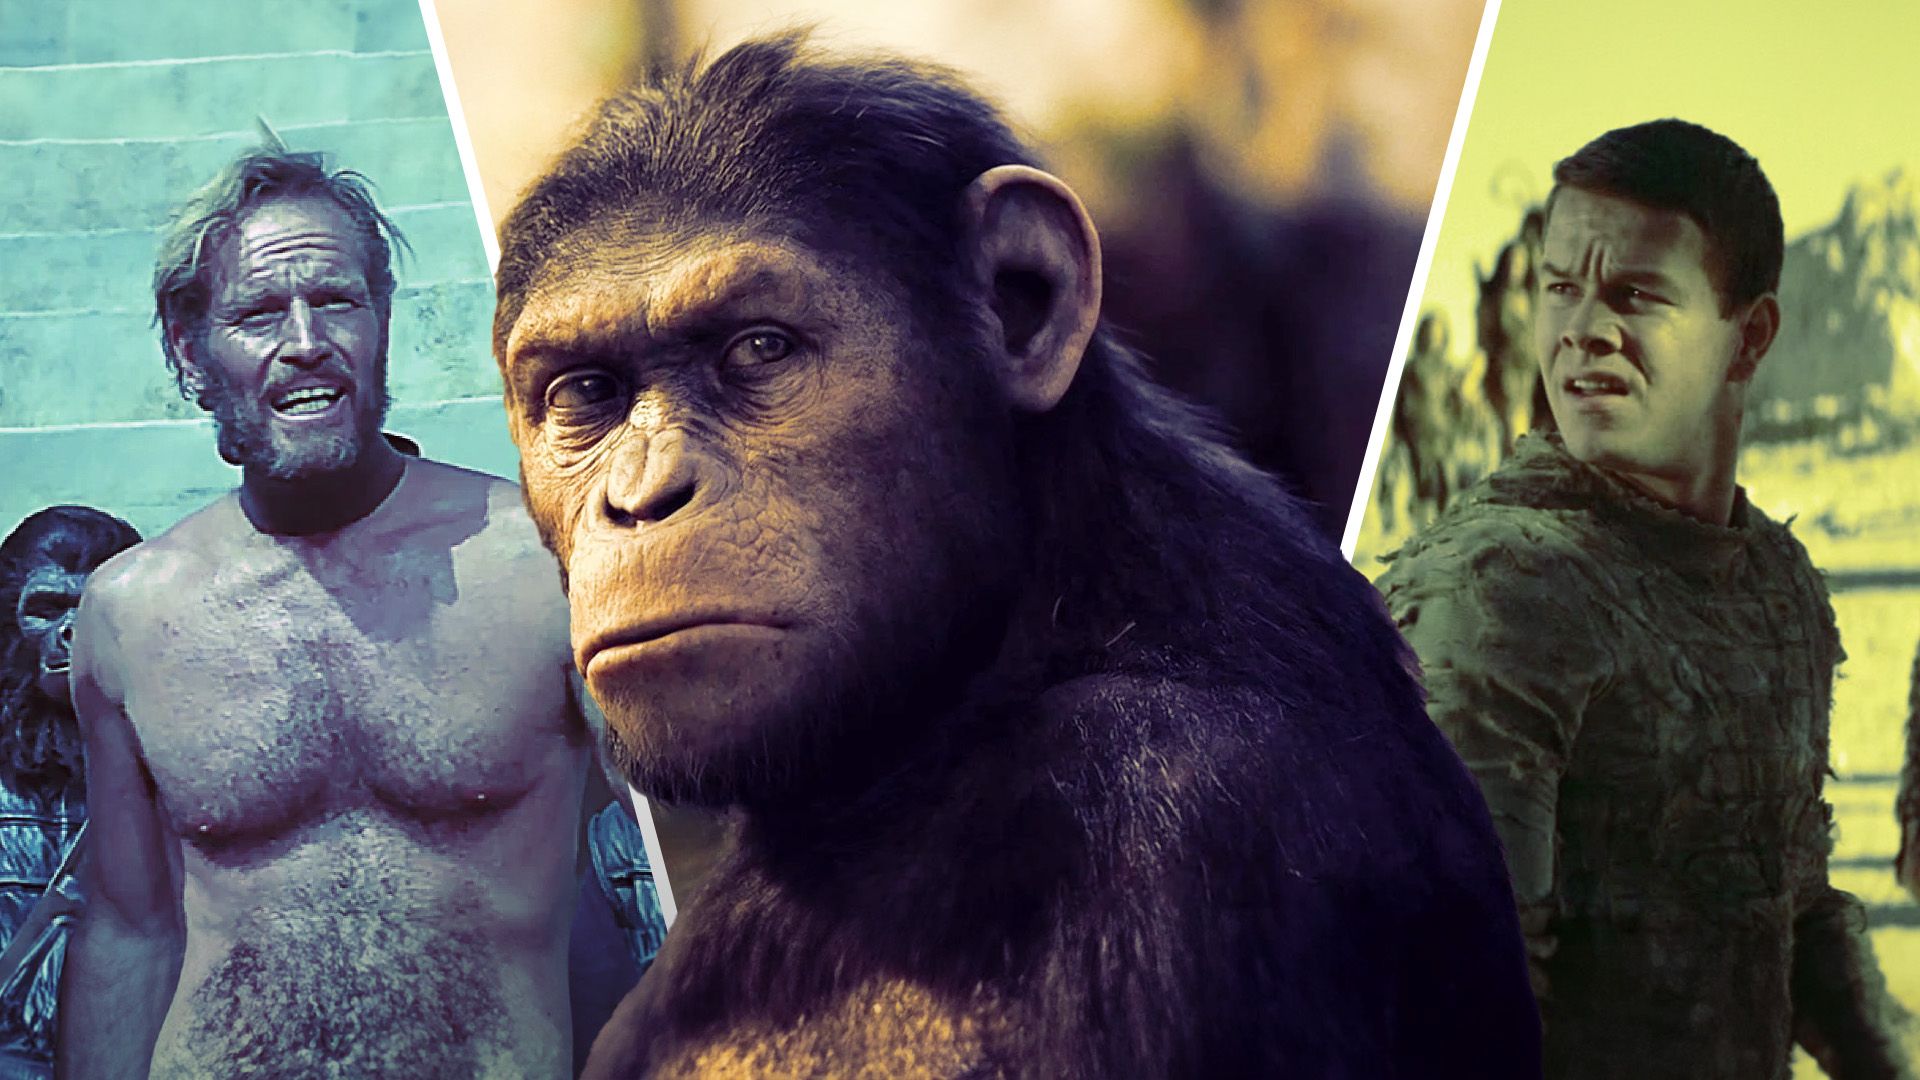 Here's What Every Planet of the Apes Movie Made at the Box Office